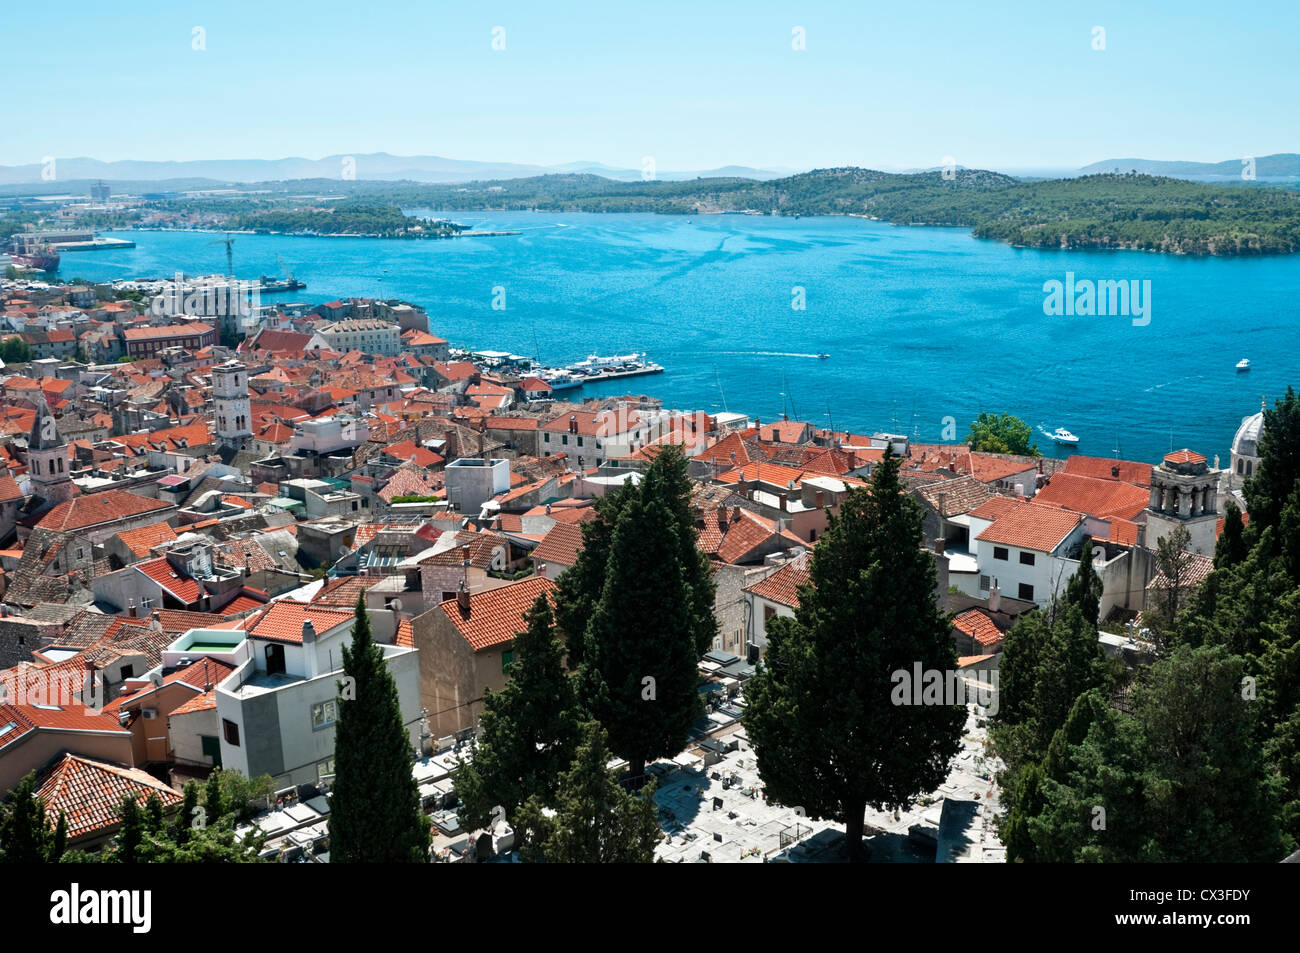 Croatia. Wide angle view over the city and bay Stock Photo